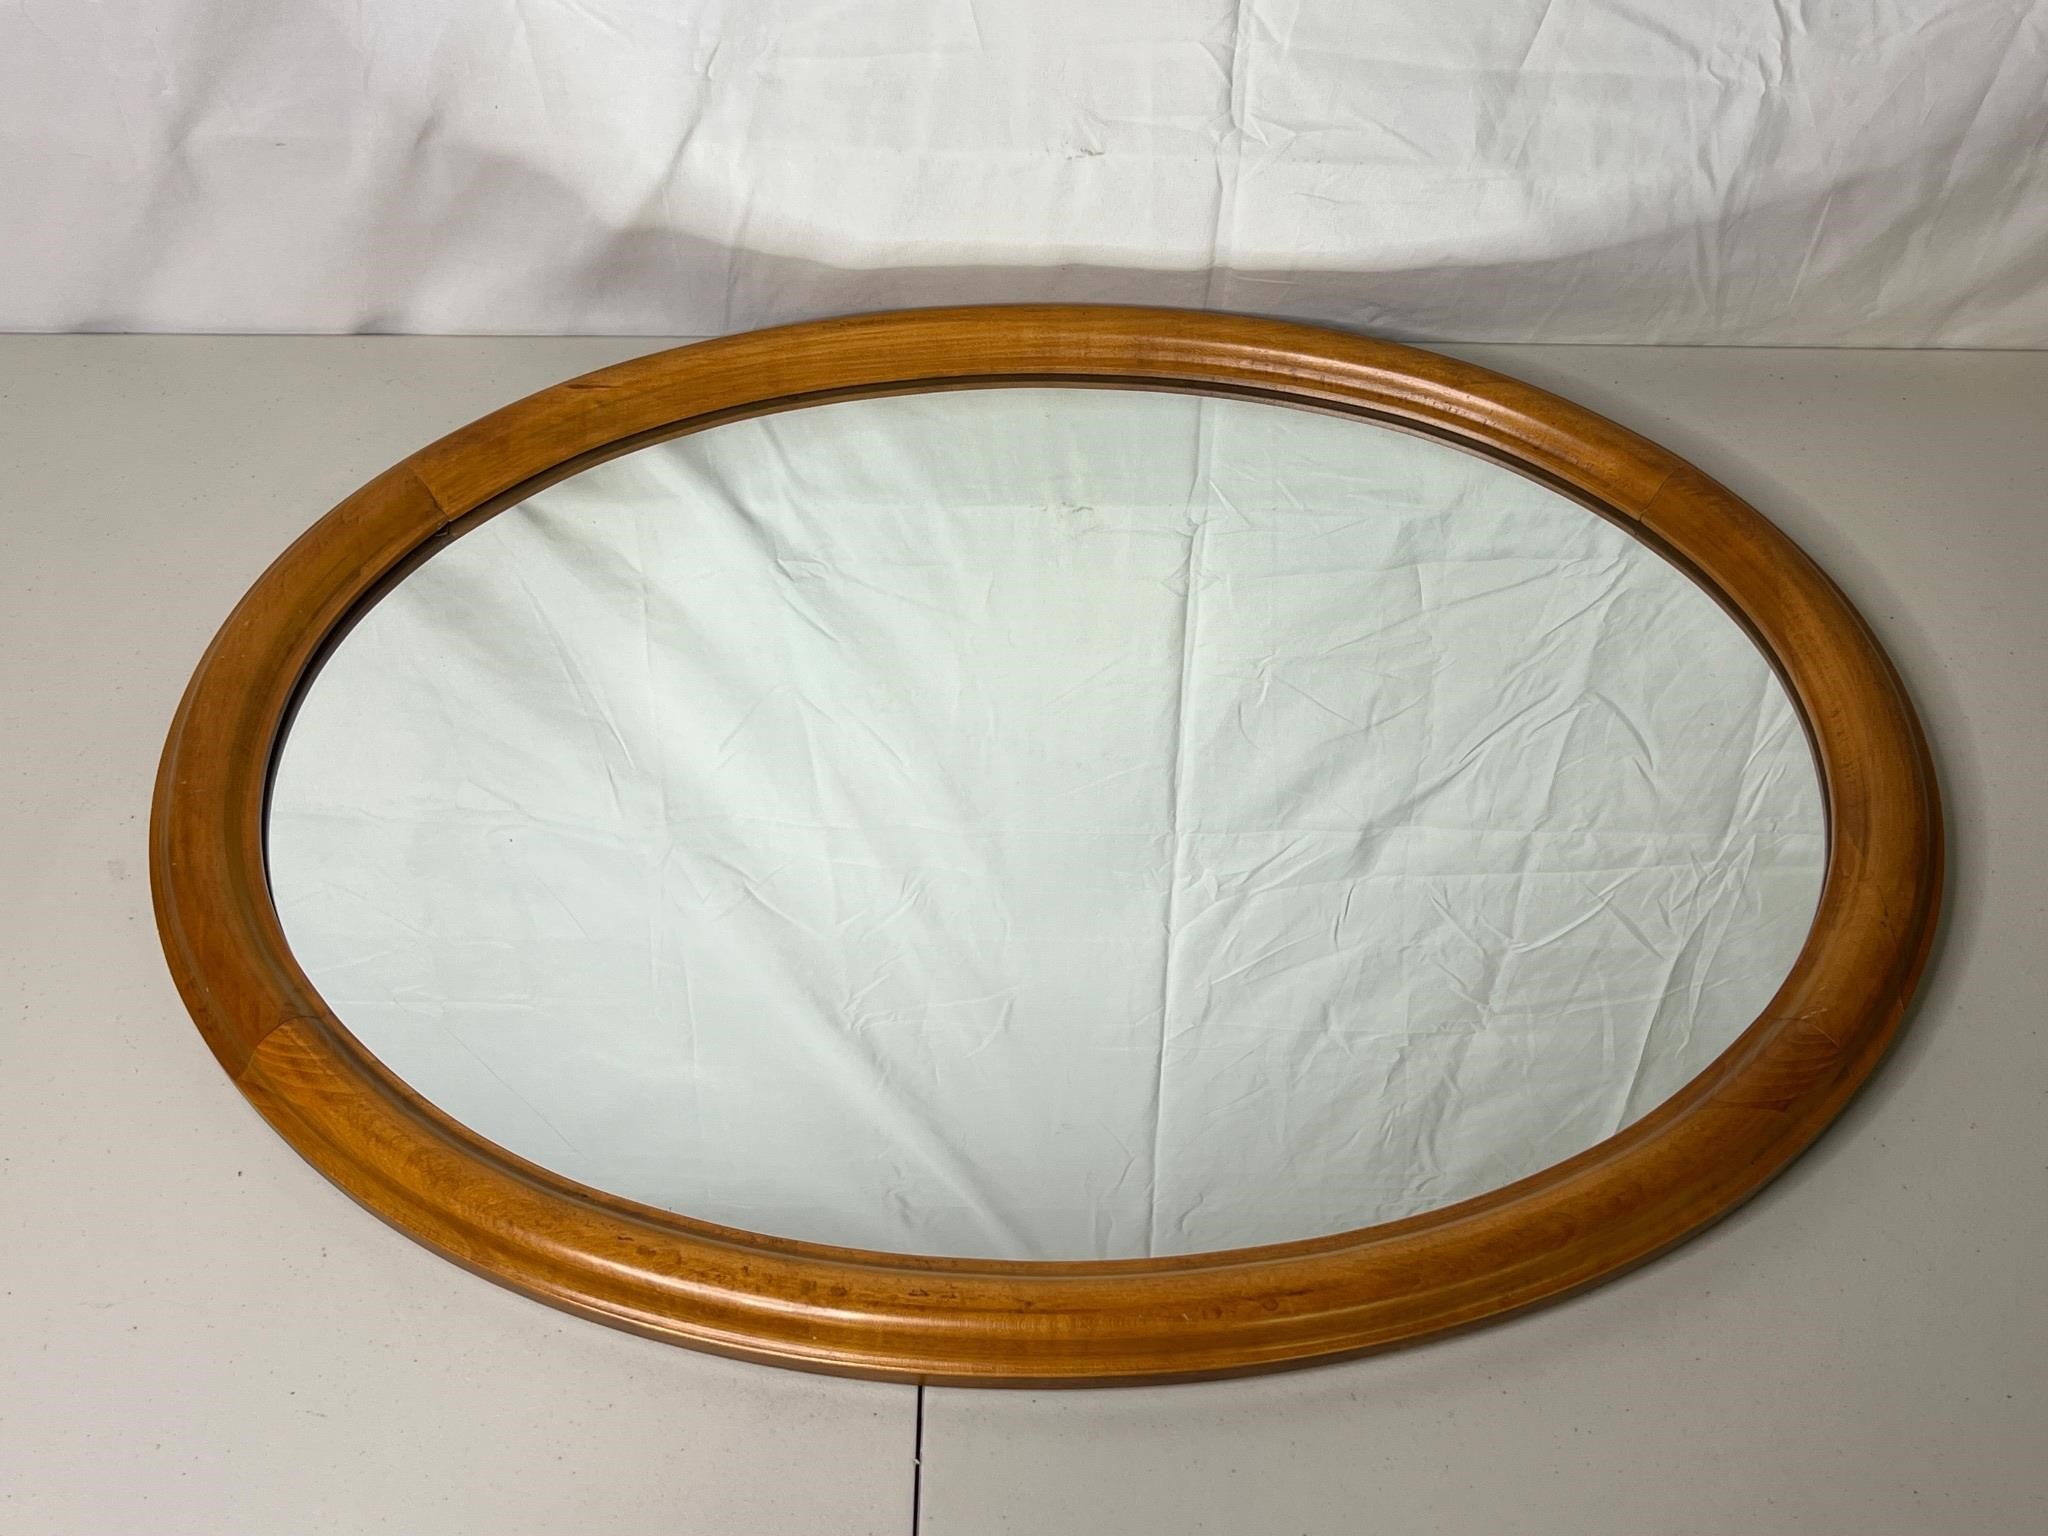 Large Oval Wall Hanging Mirror from Tell City